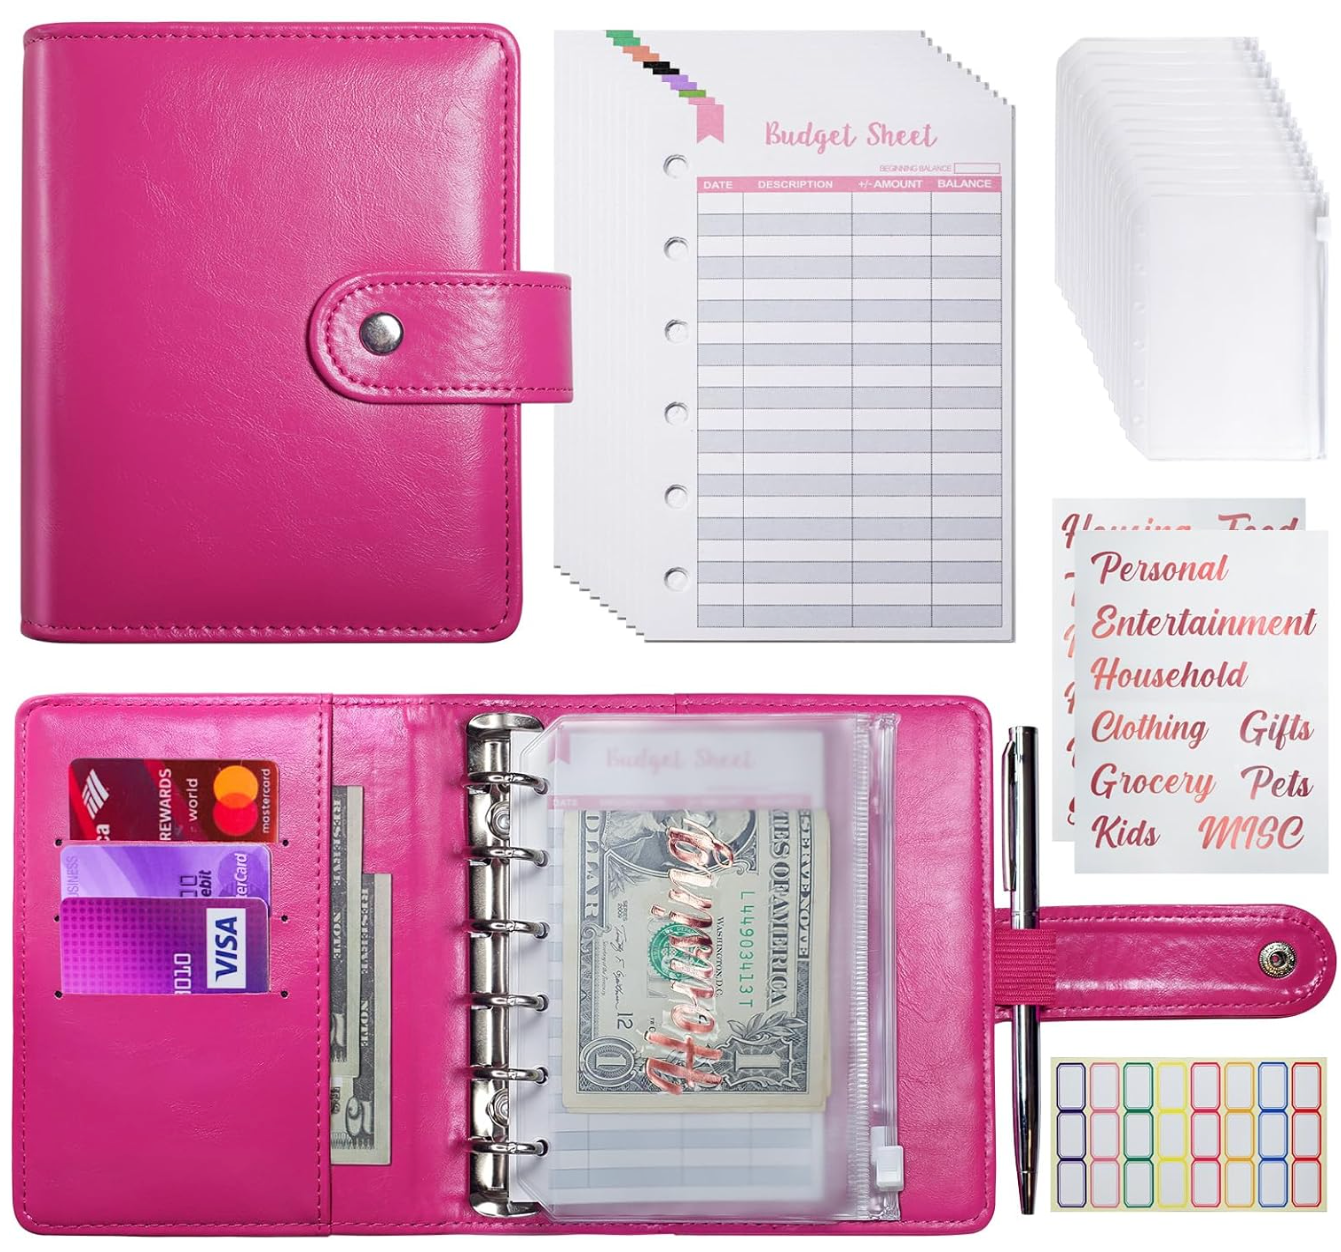 The Rich Girl Lifestyle Hot Pink Mini Binder Wallet for Cash Stuffing